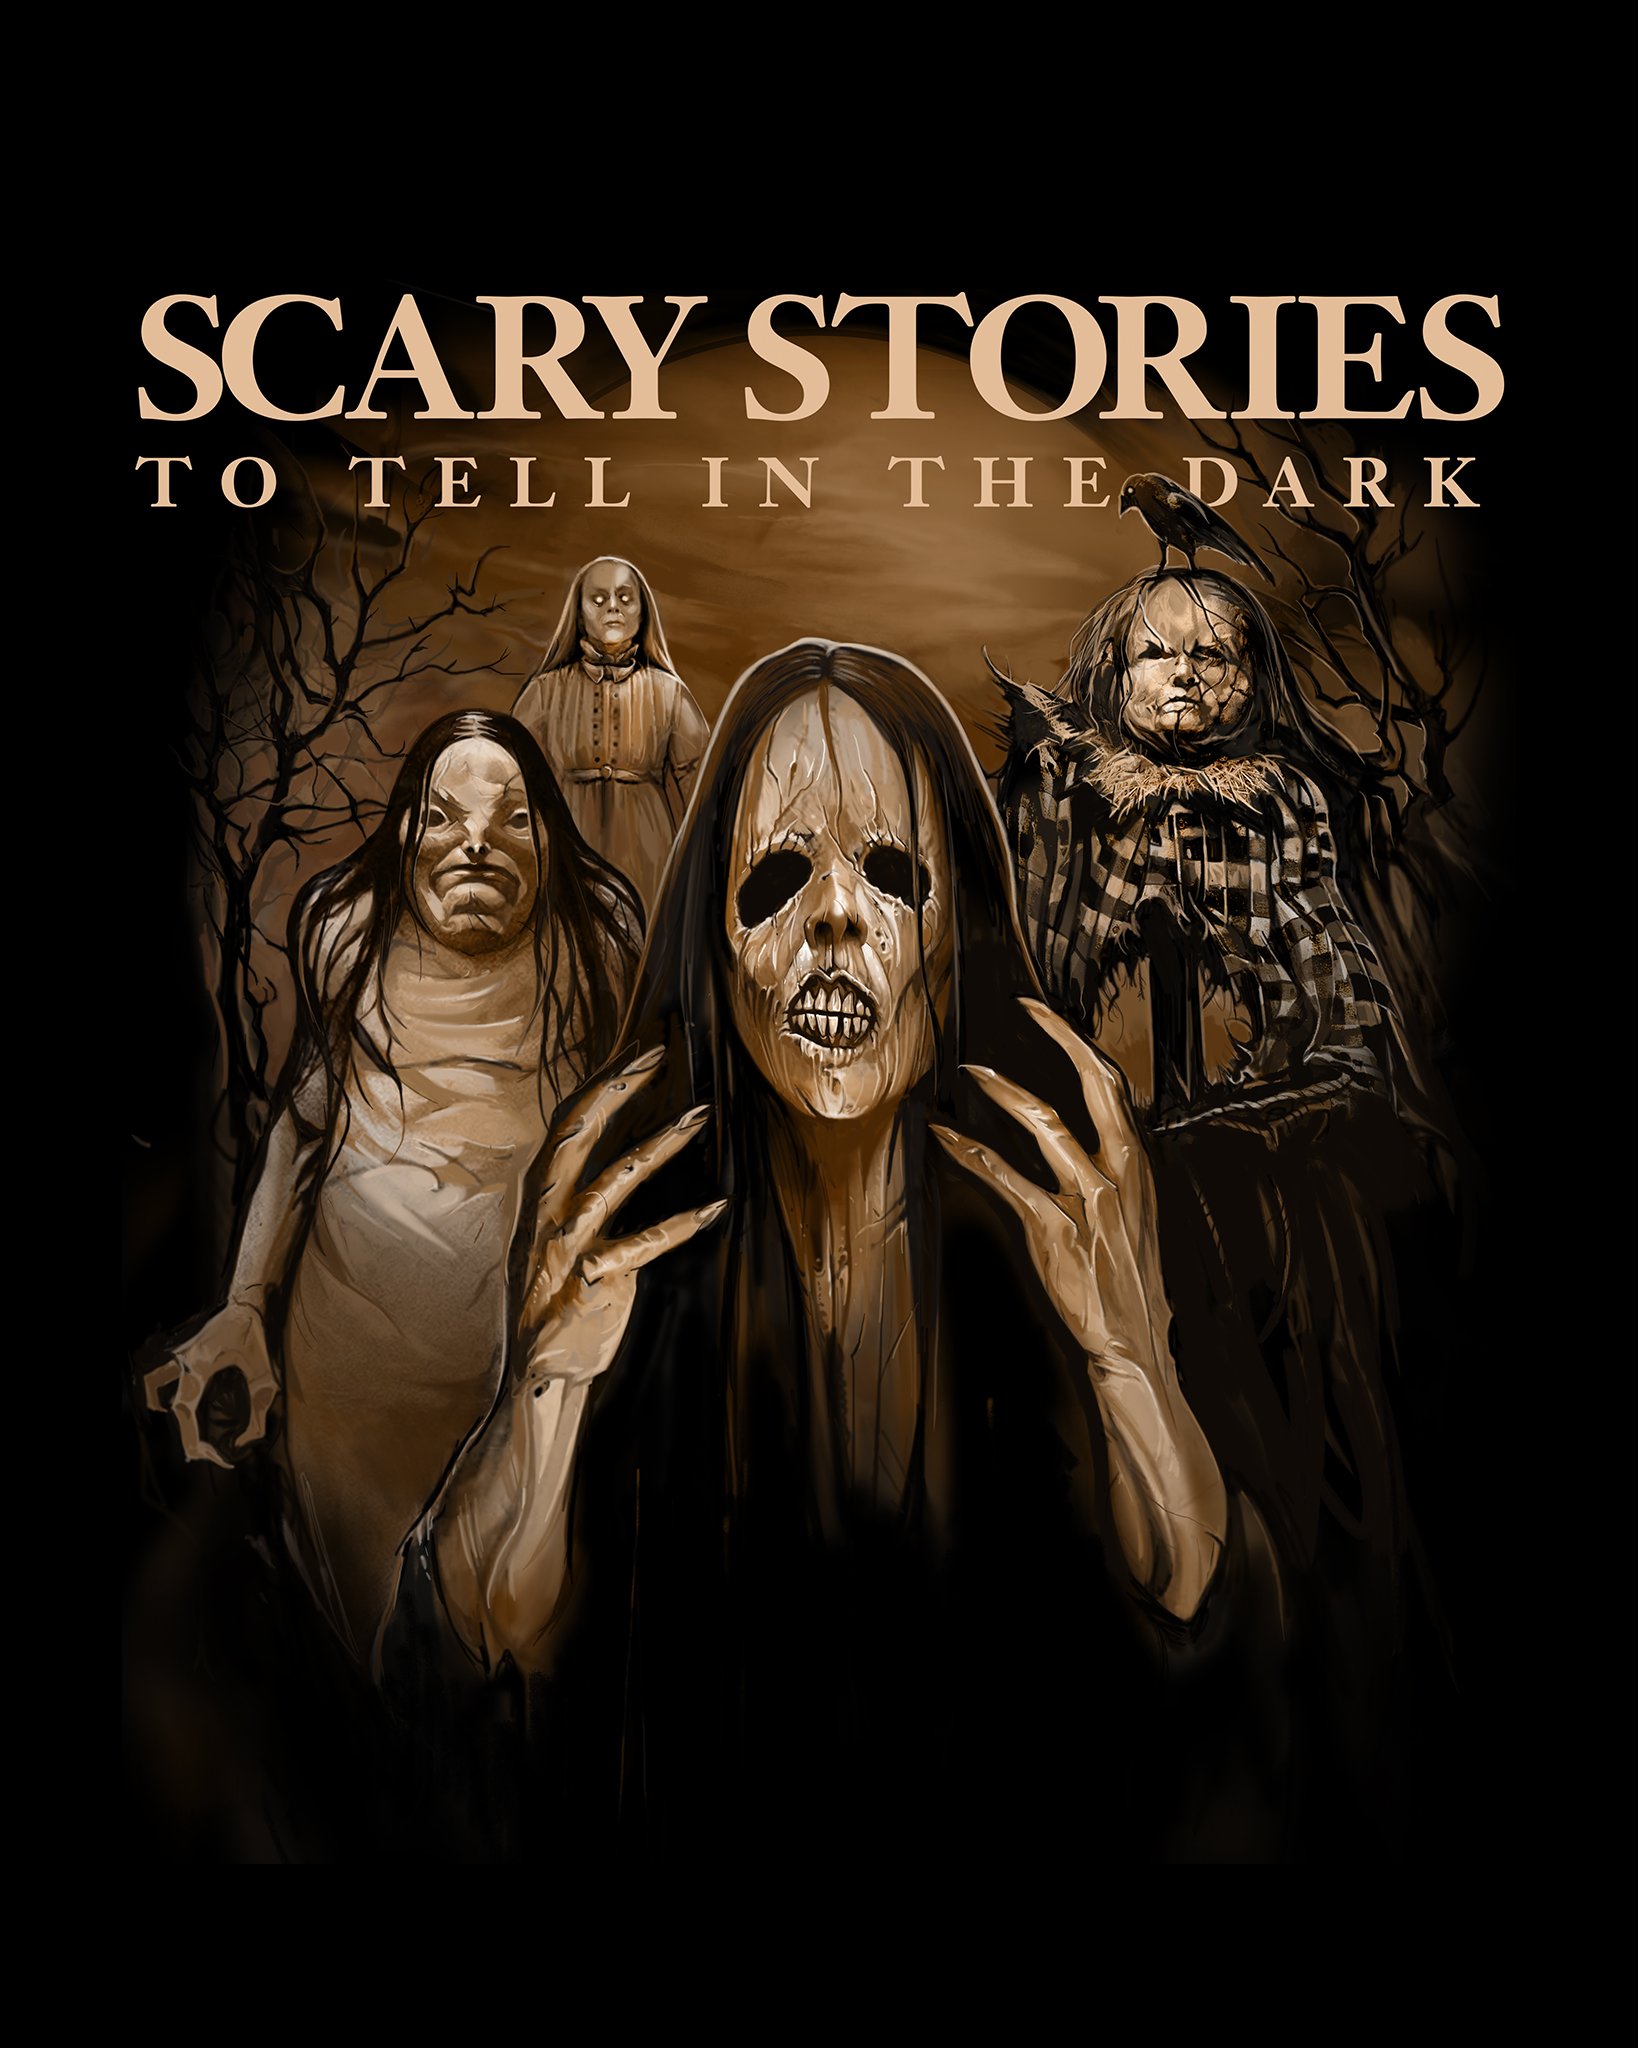 Scary stories in the dark. Scary stories to tell in the Dark книга. Scary stories to tell in the Dark Гарольд.